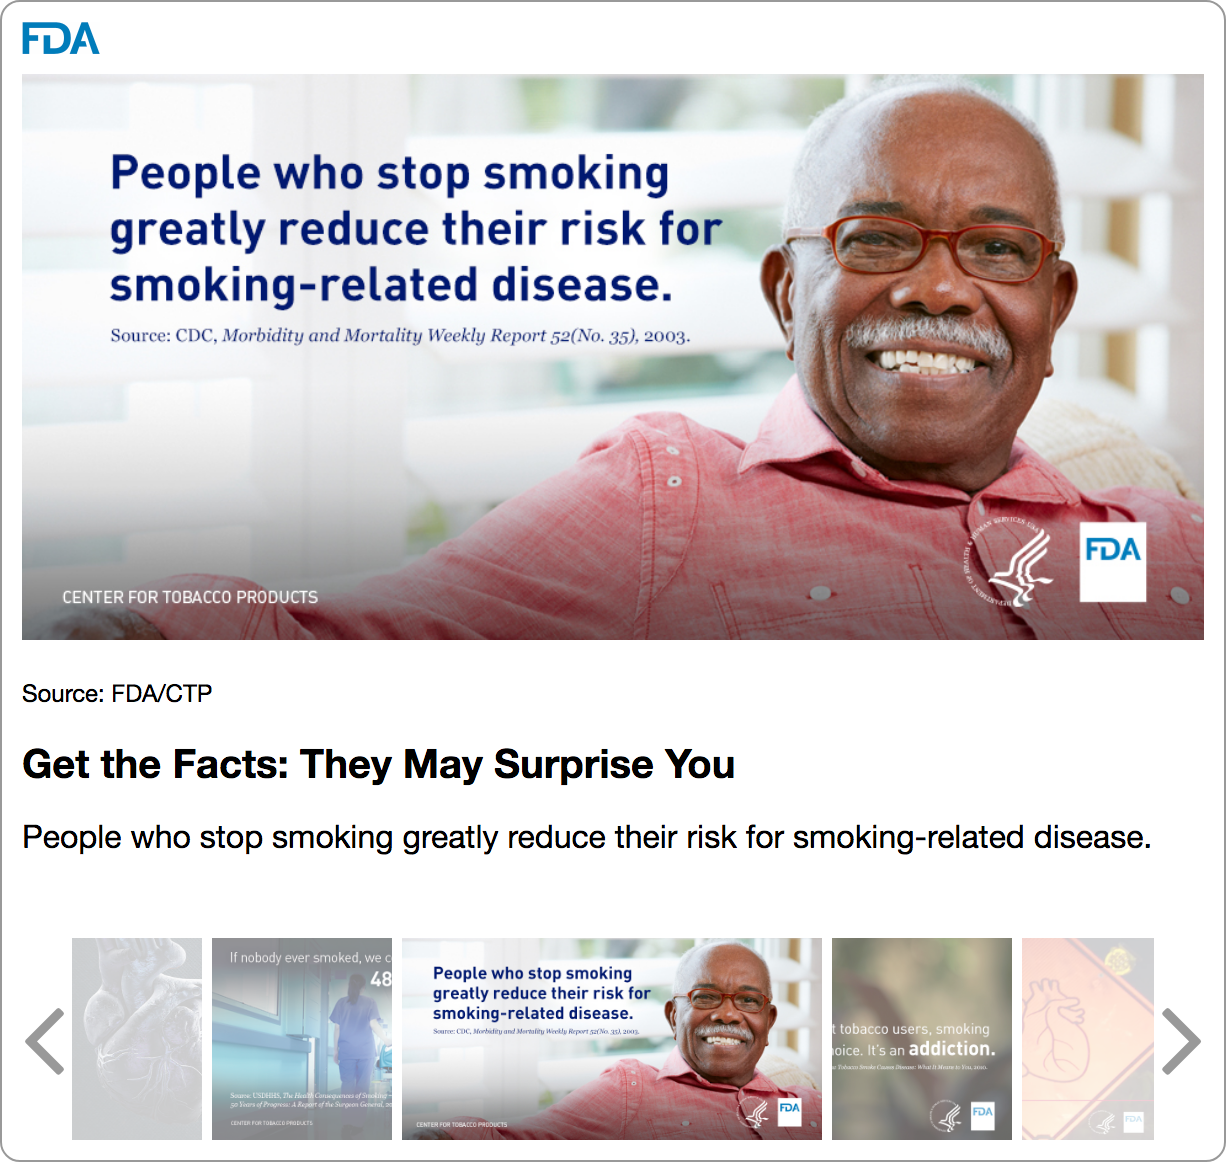 This widget contains five gallery images about the health effects of tobacco use.